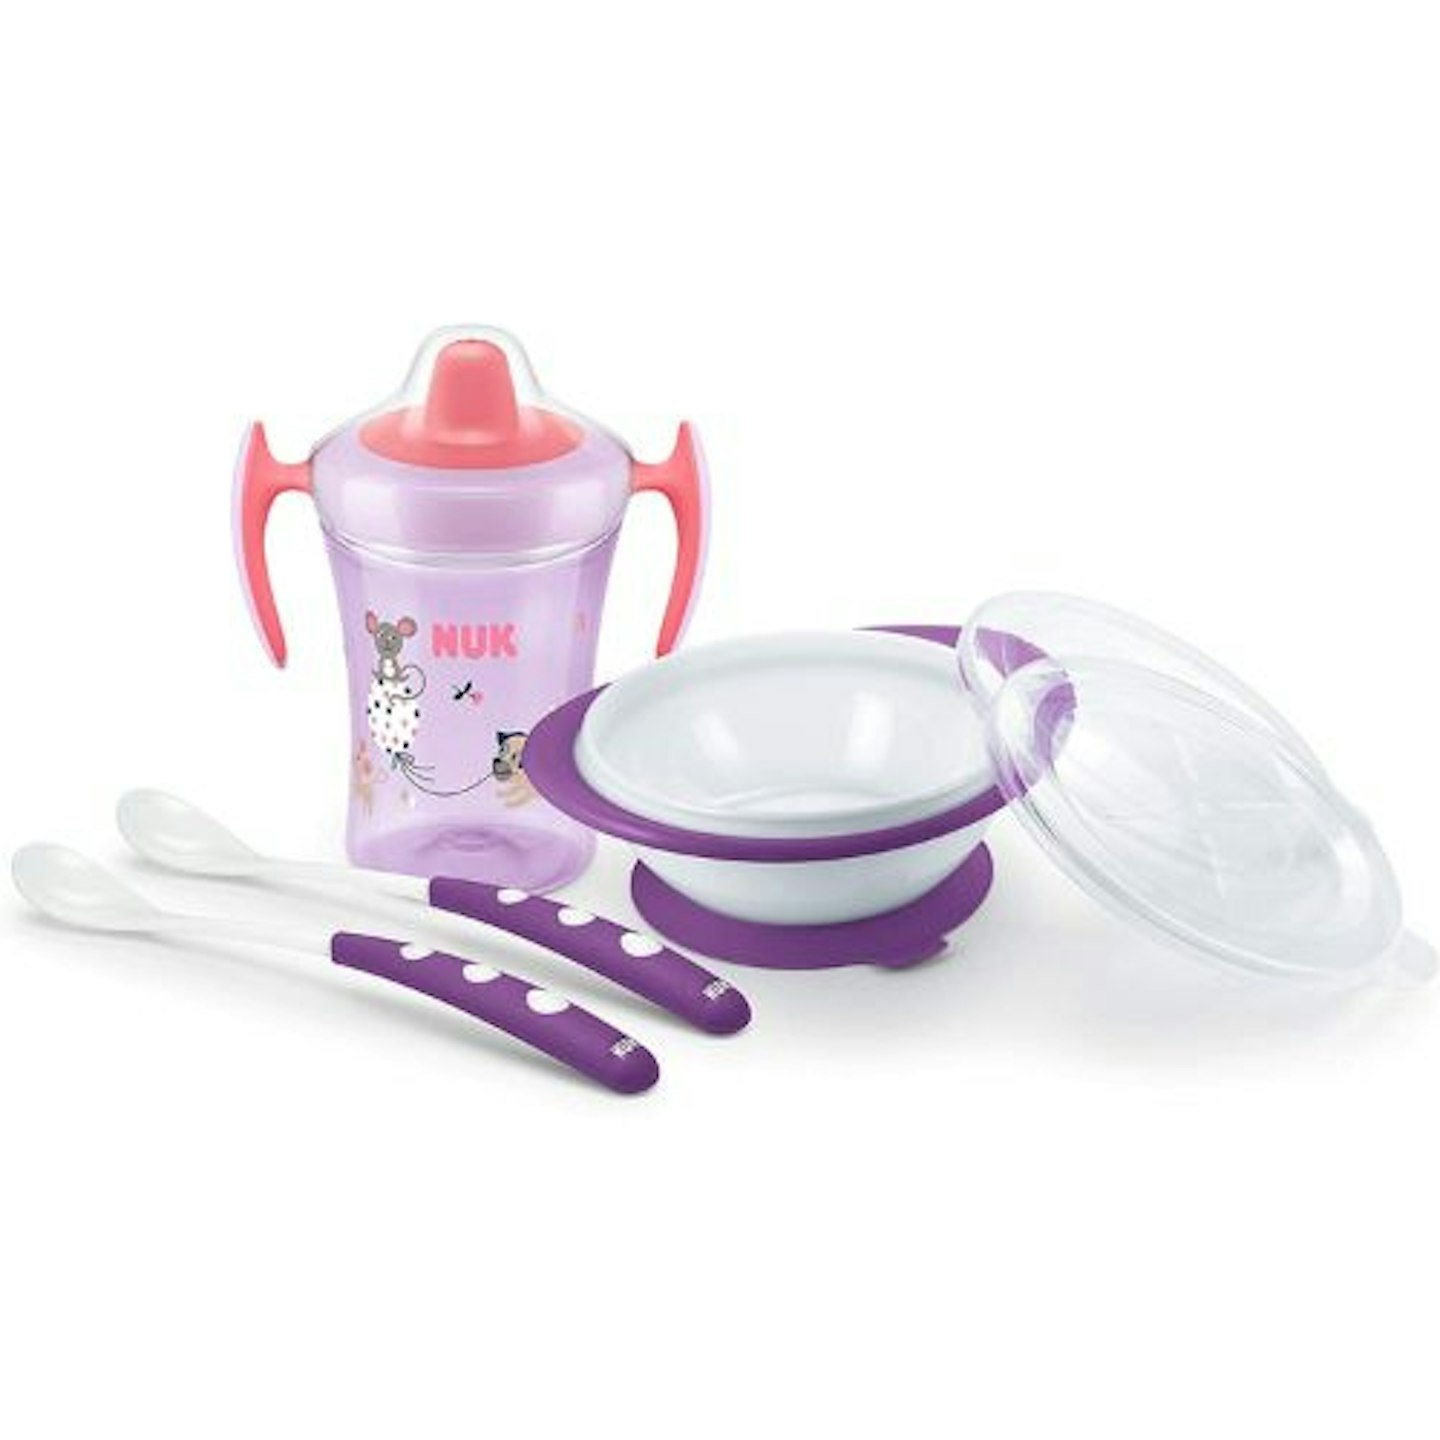 Best weaning sets NUK Learn to Eat Set